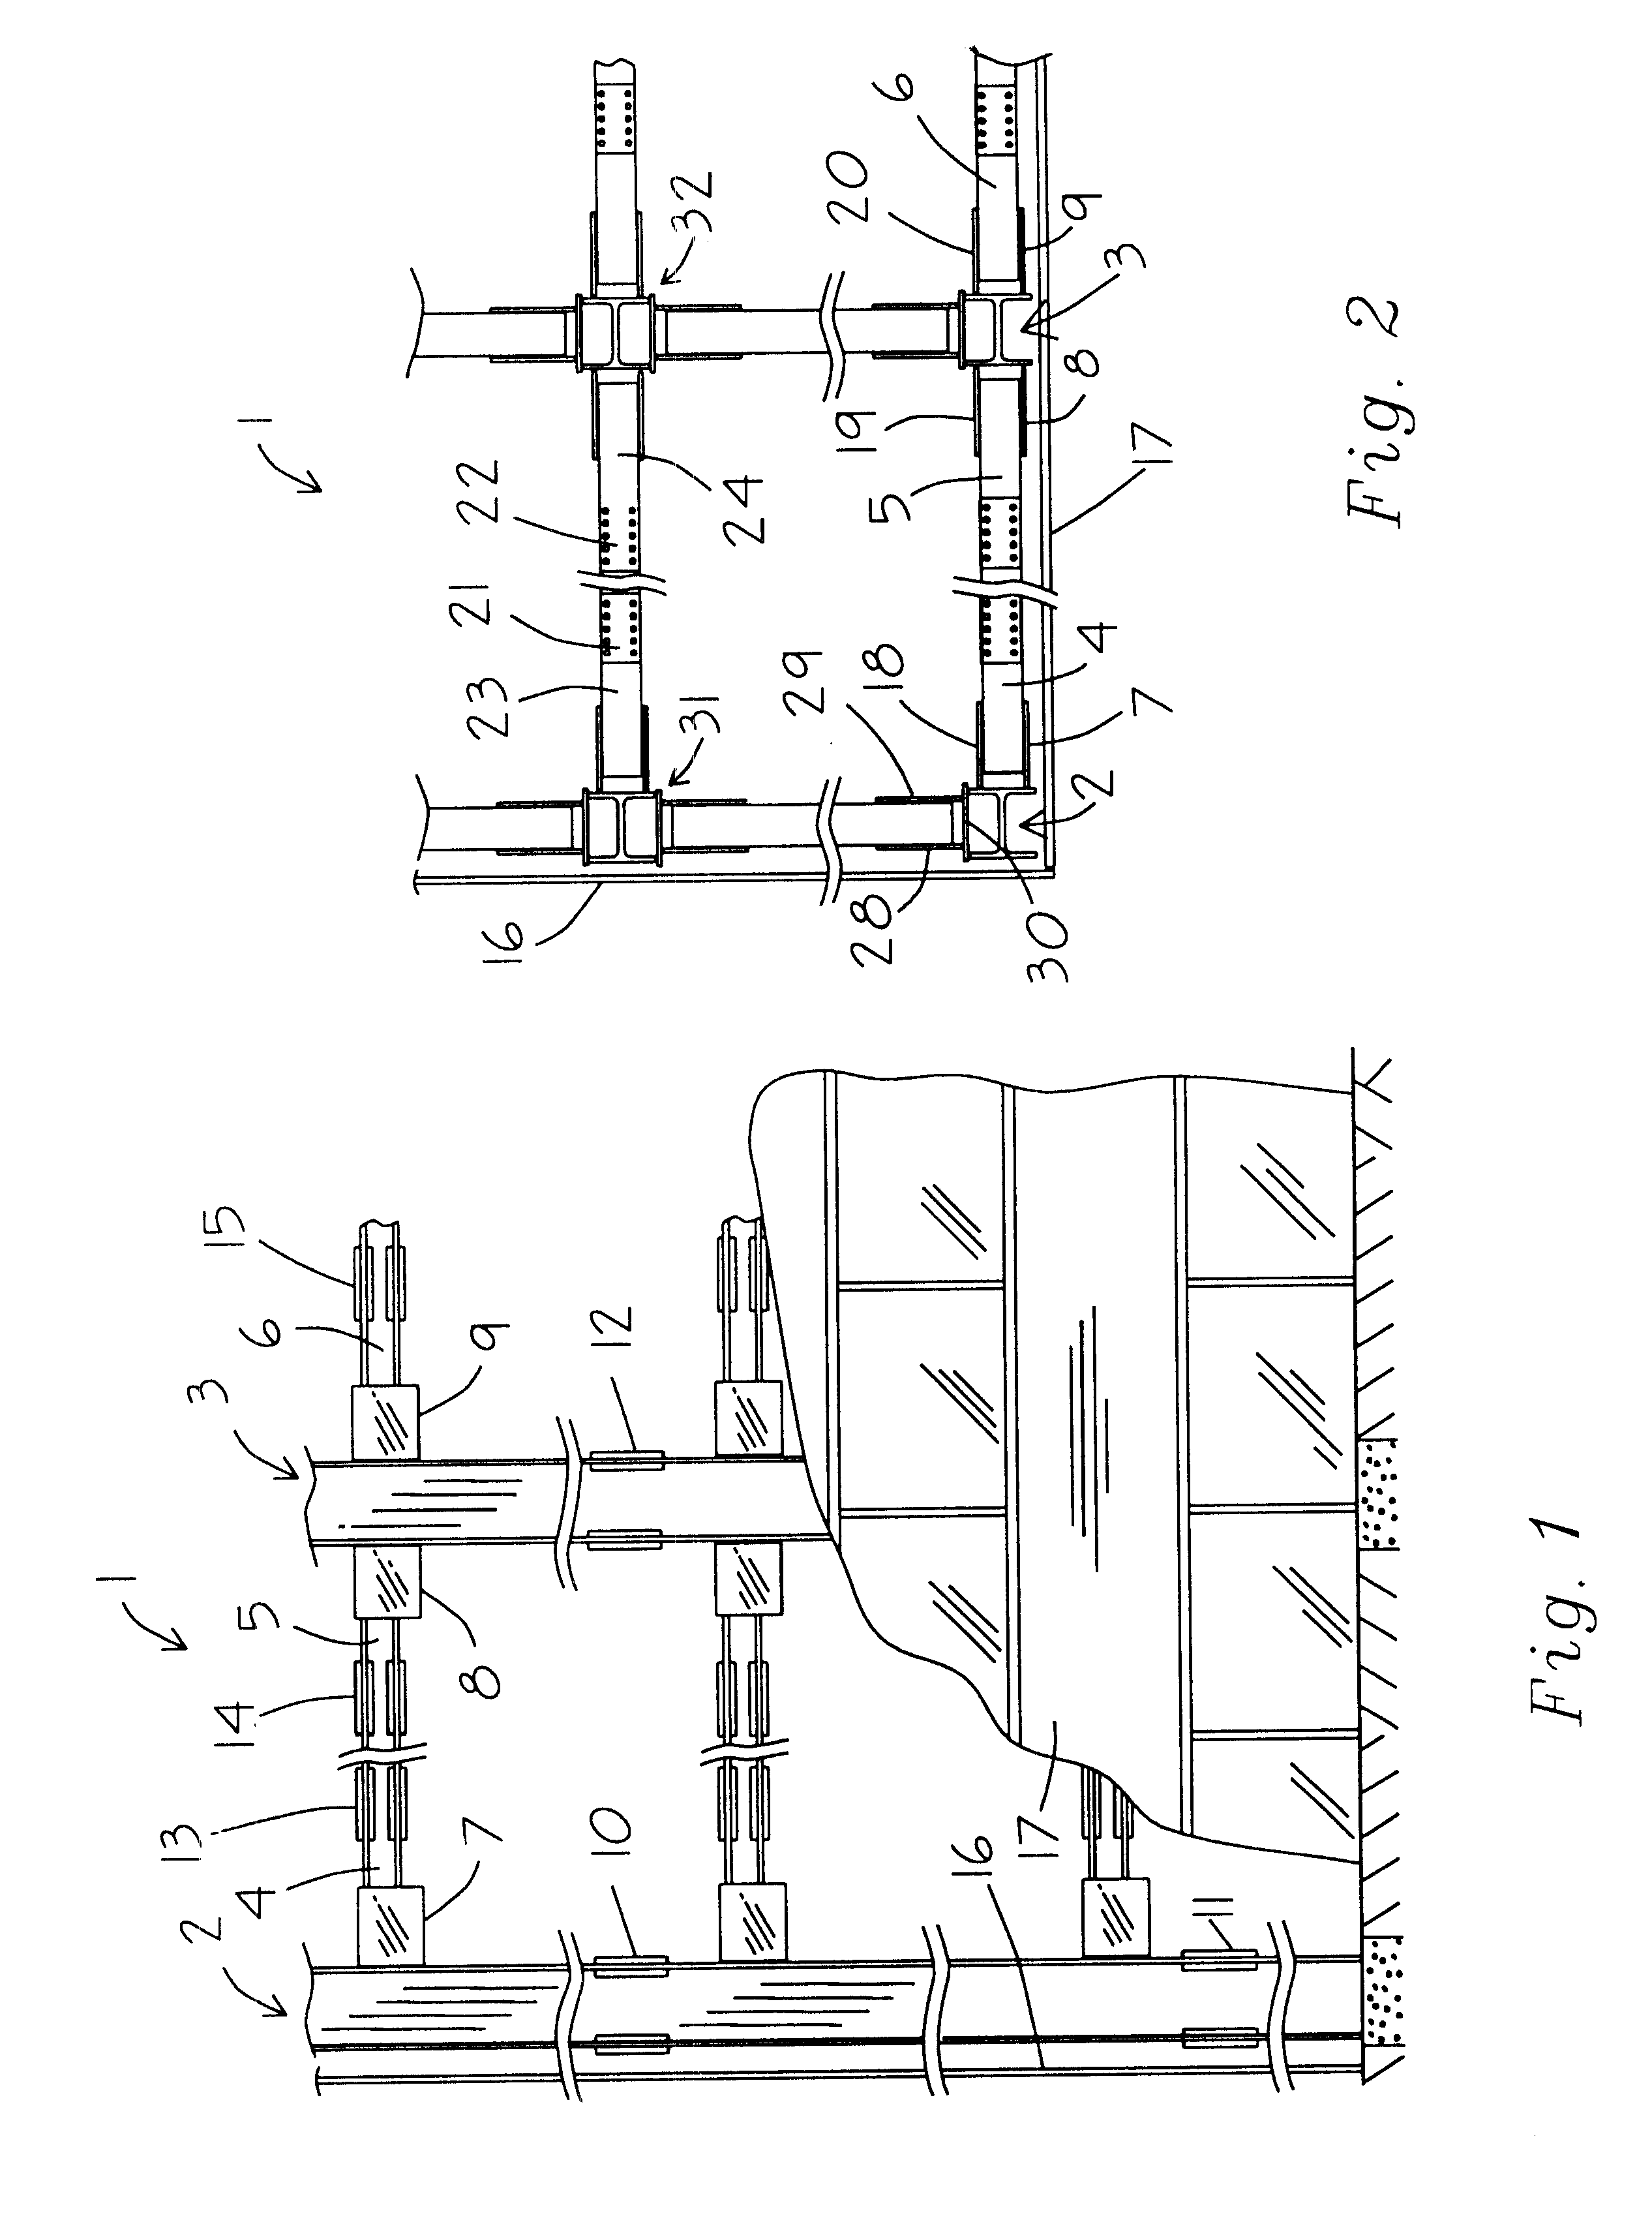 Gusset plates connection of beam to column